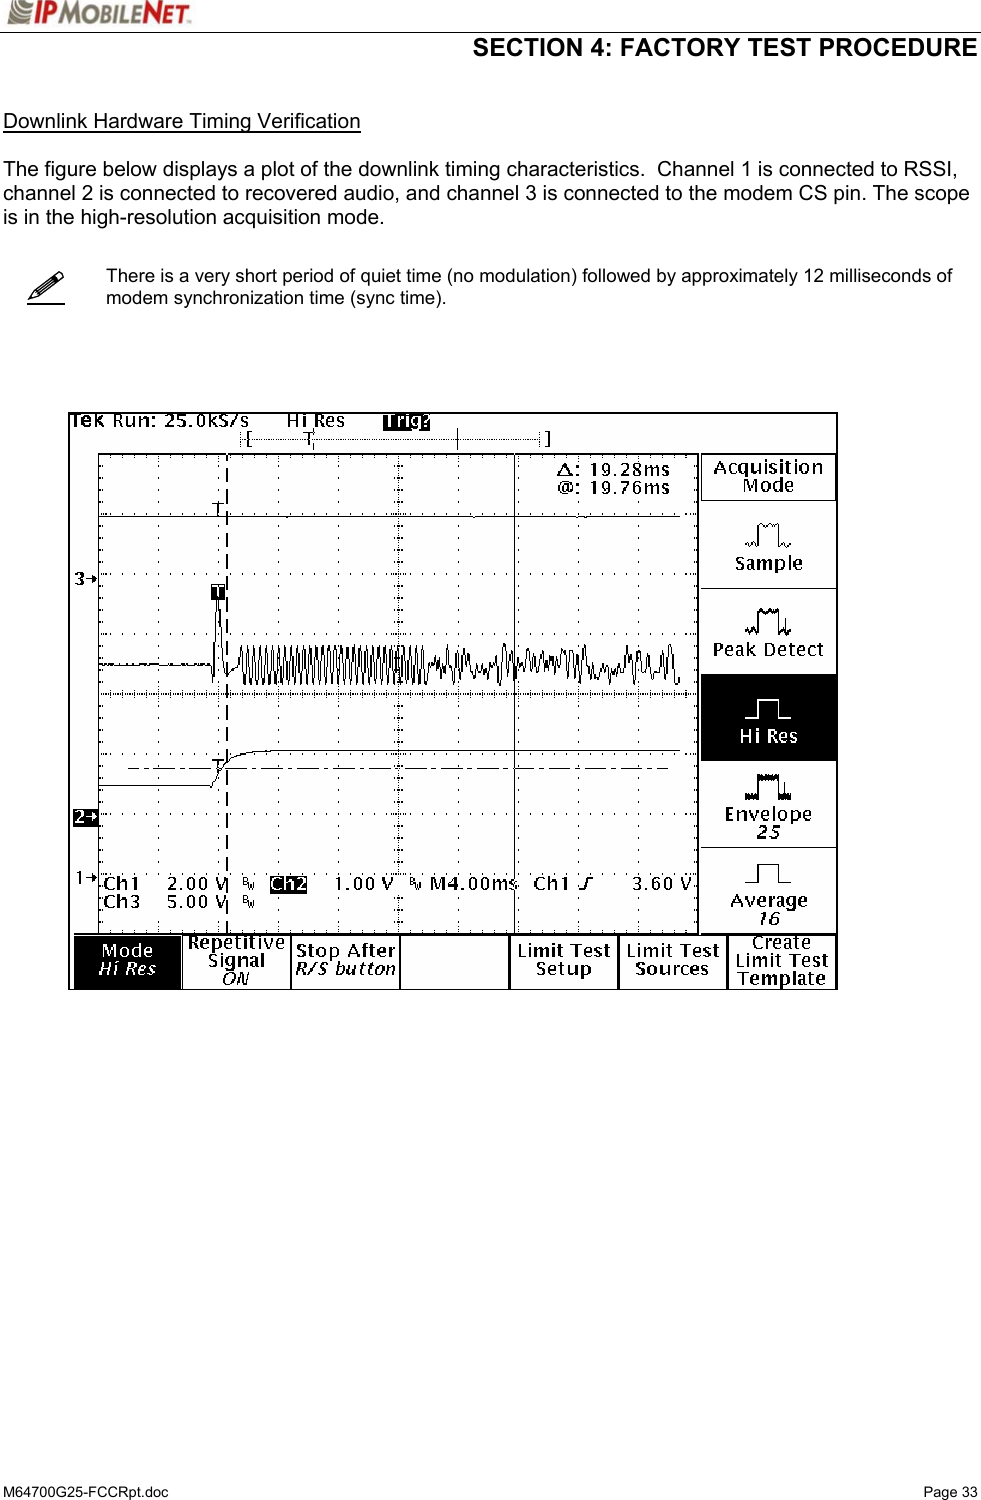  SECTION 4: FACTORY TEST PROCEDURE  M64700G25-FCCRpt.doc   Page 33    Downlink Hardware Timing Verification  The figure below displays a plot of the downlink timing characteristics.  Channel 1 is connected to RSSI, channel 2 is connected to recovered audio, and channel 3 is connected to the modem CS pin. The scope is in the high-resolution acquisition mode.      There is a very short period of quiet time (no modulation) followed by approximately 12 milliseconds of modem synchronization time (sync time).          